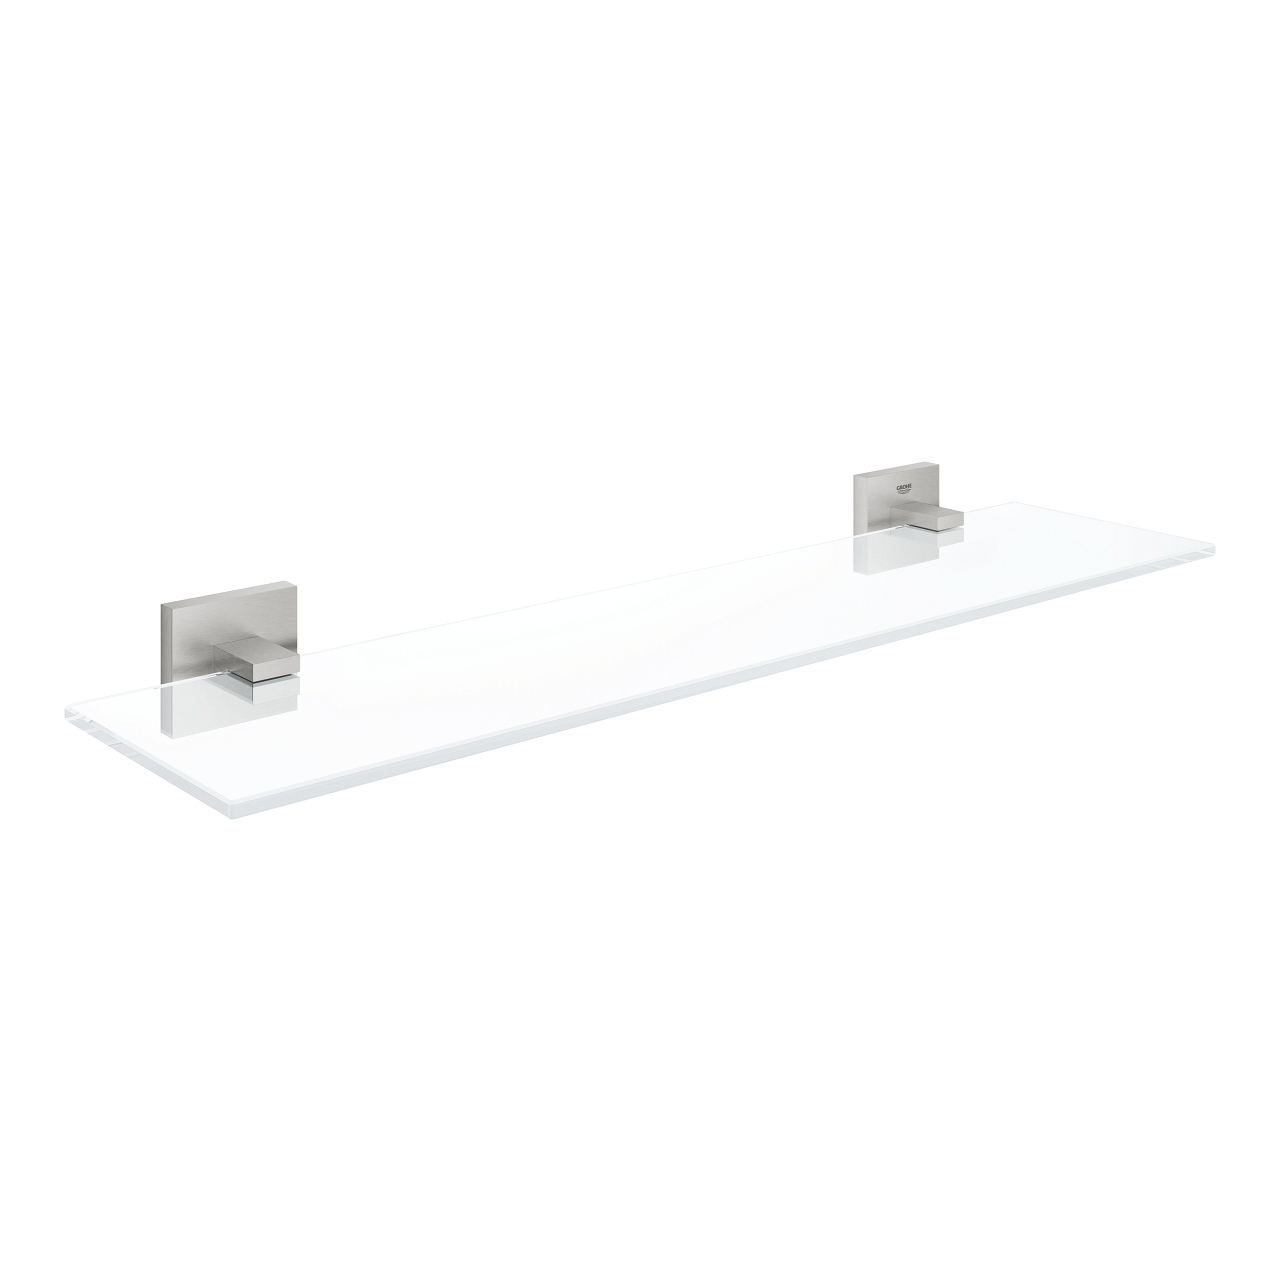 GROHE Start Cube